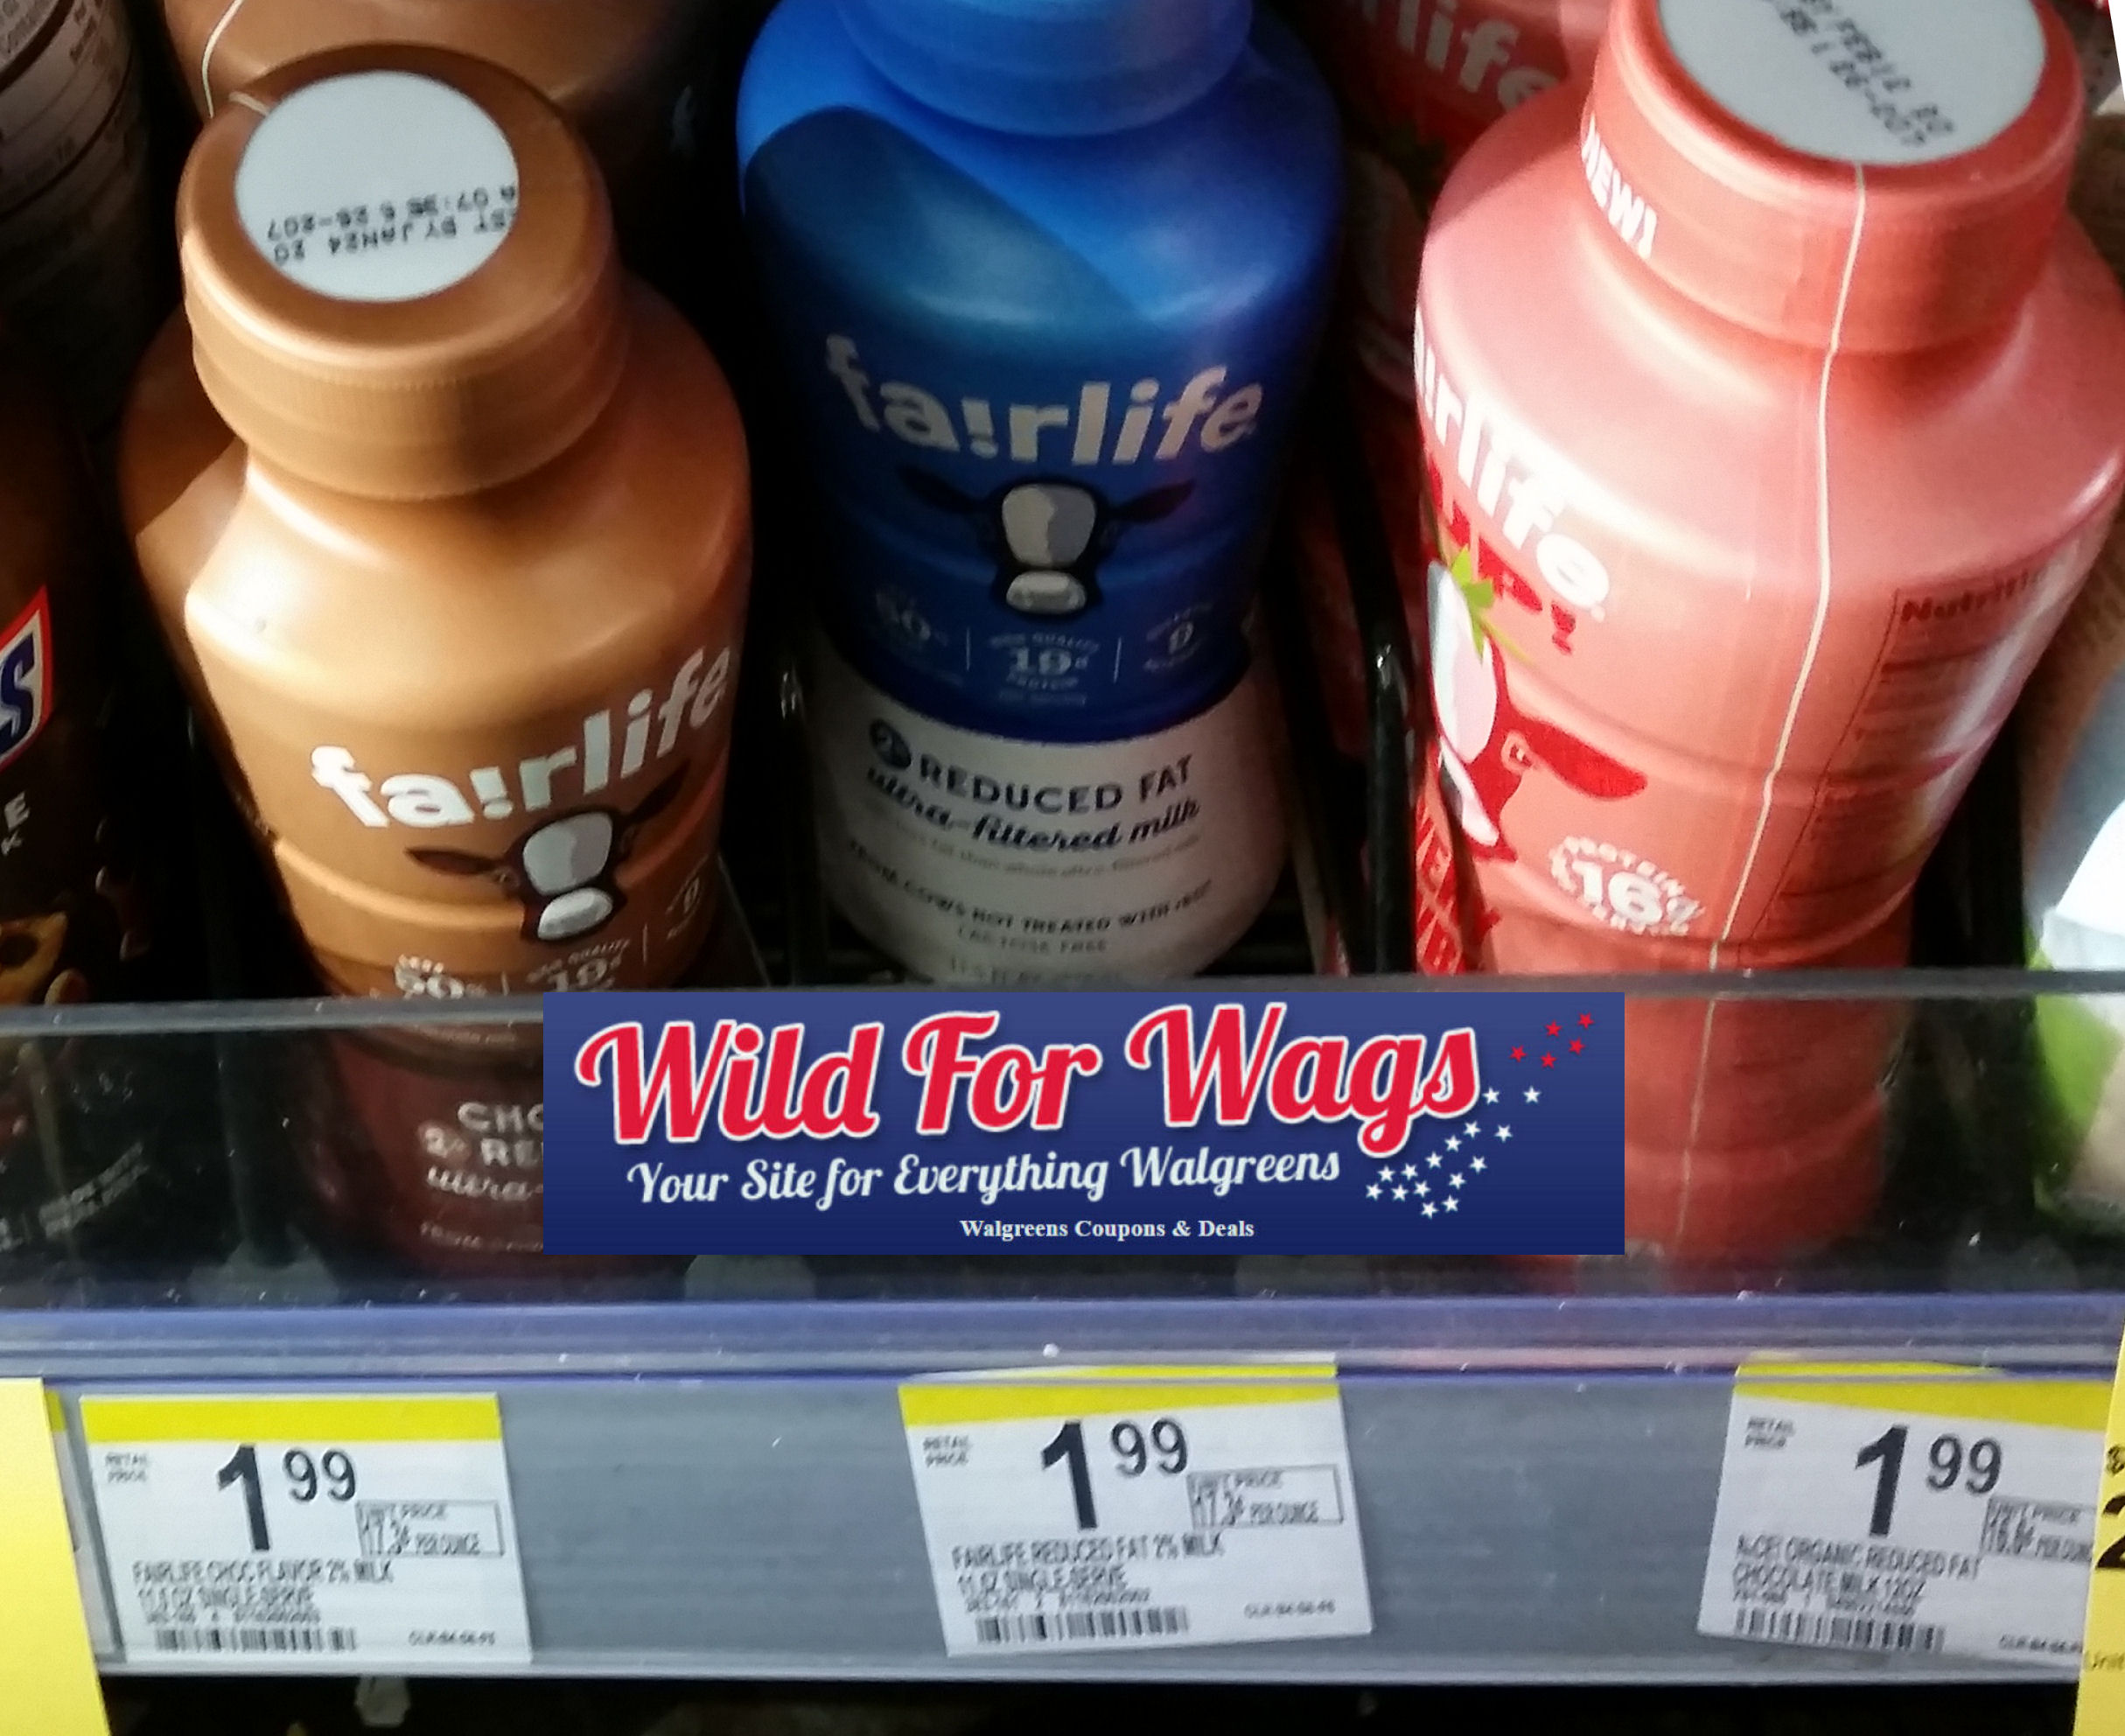 Grab Fairlife Milk Coupon & Use At Walgreens No Size Restriction!